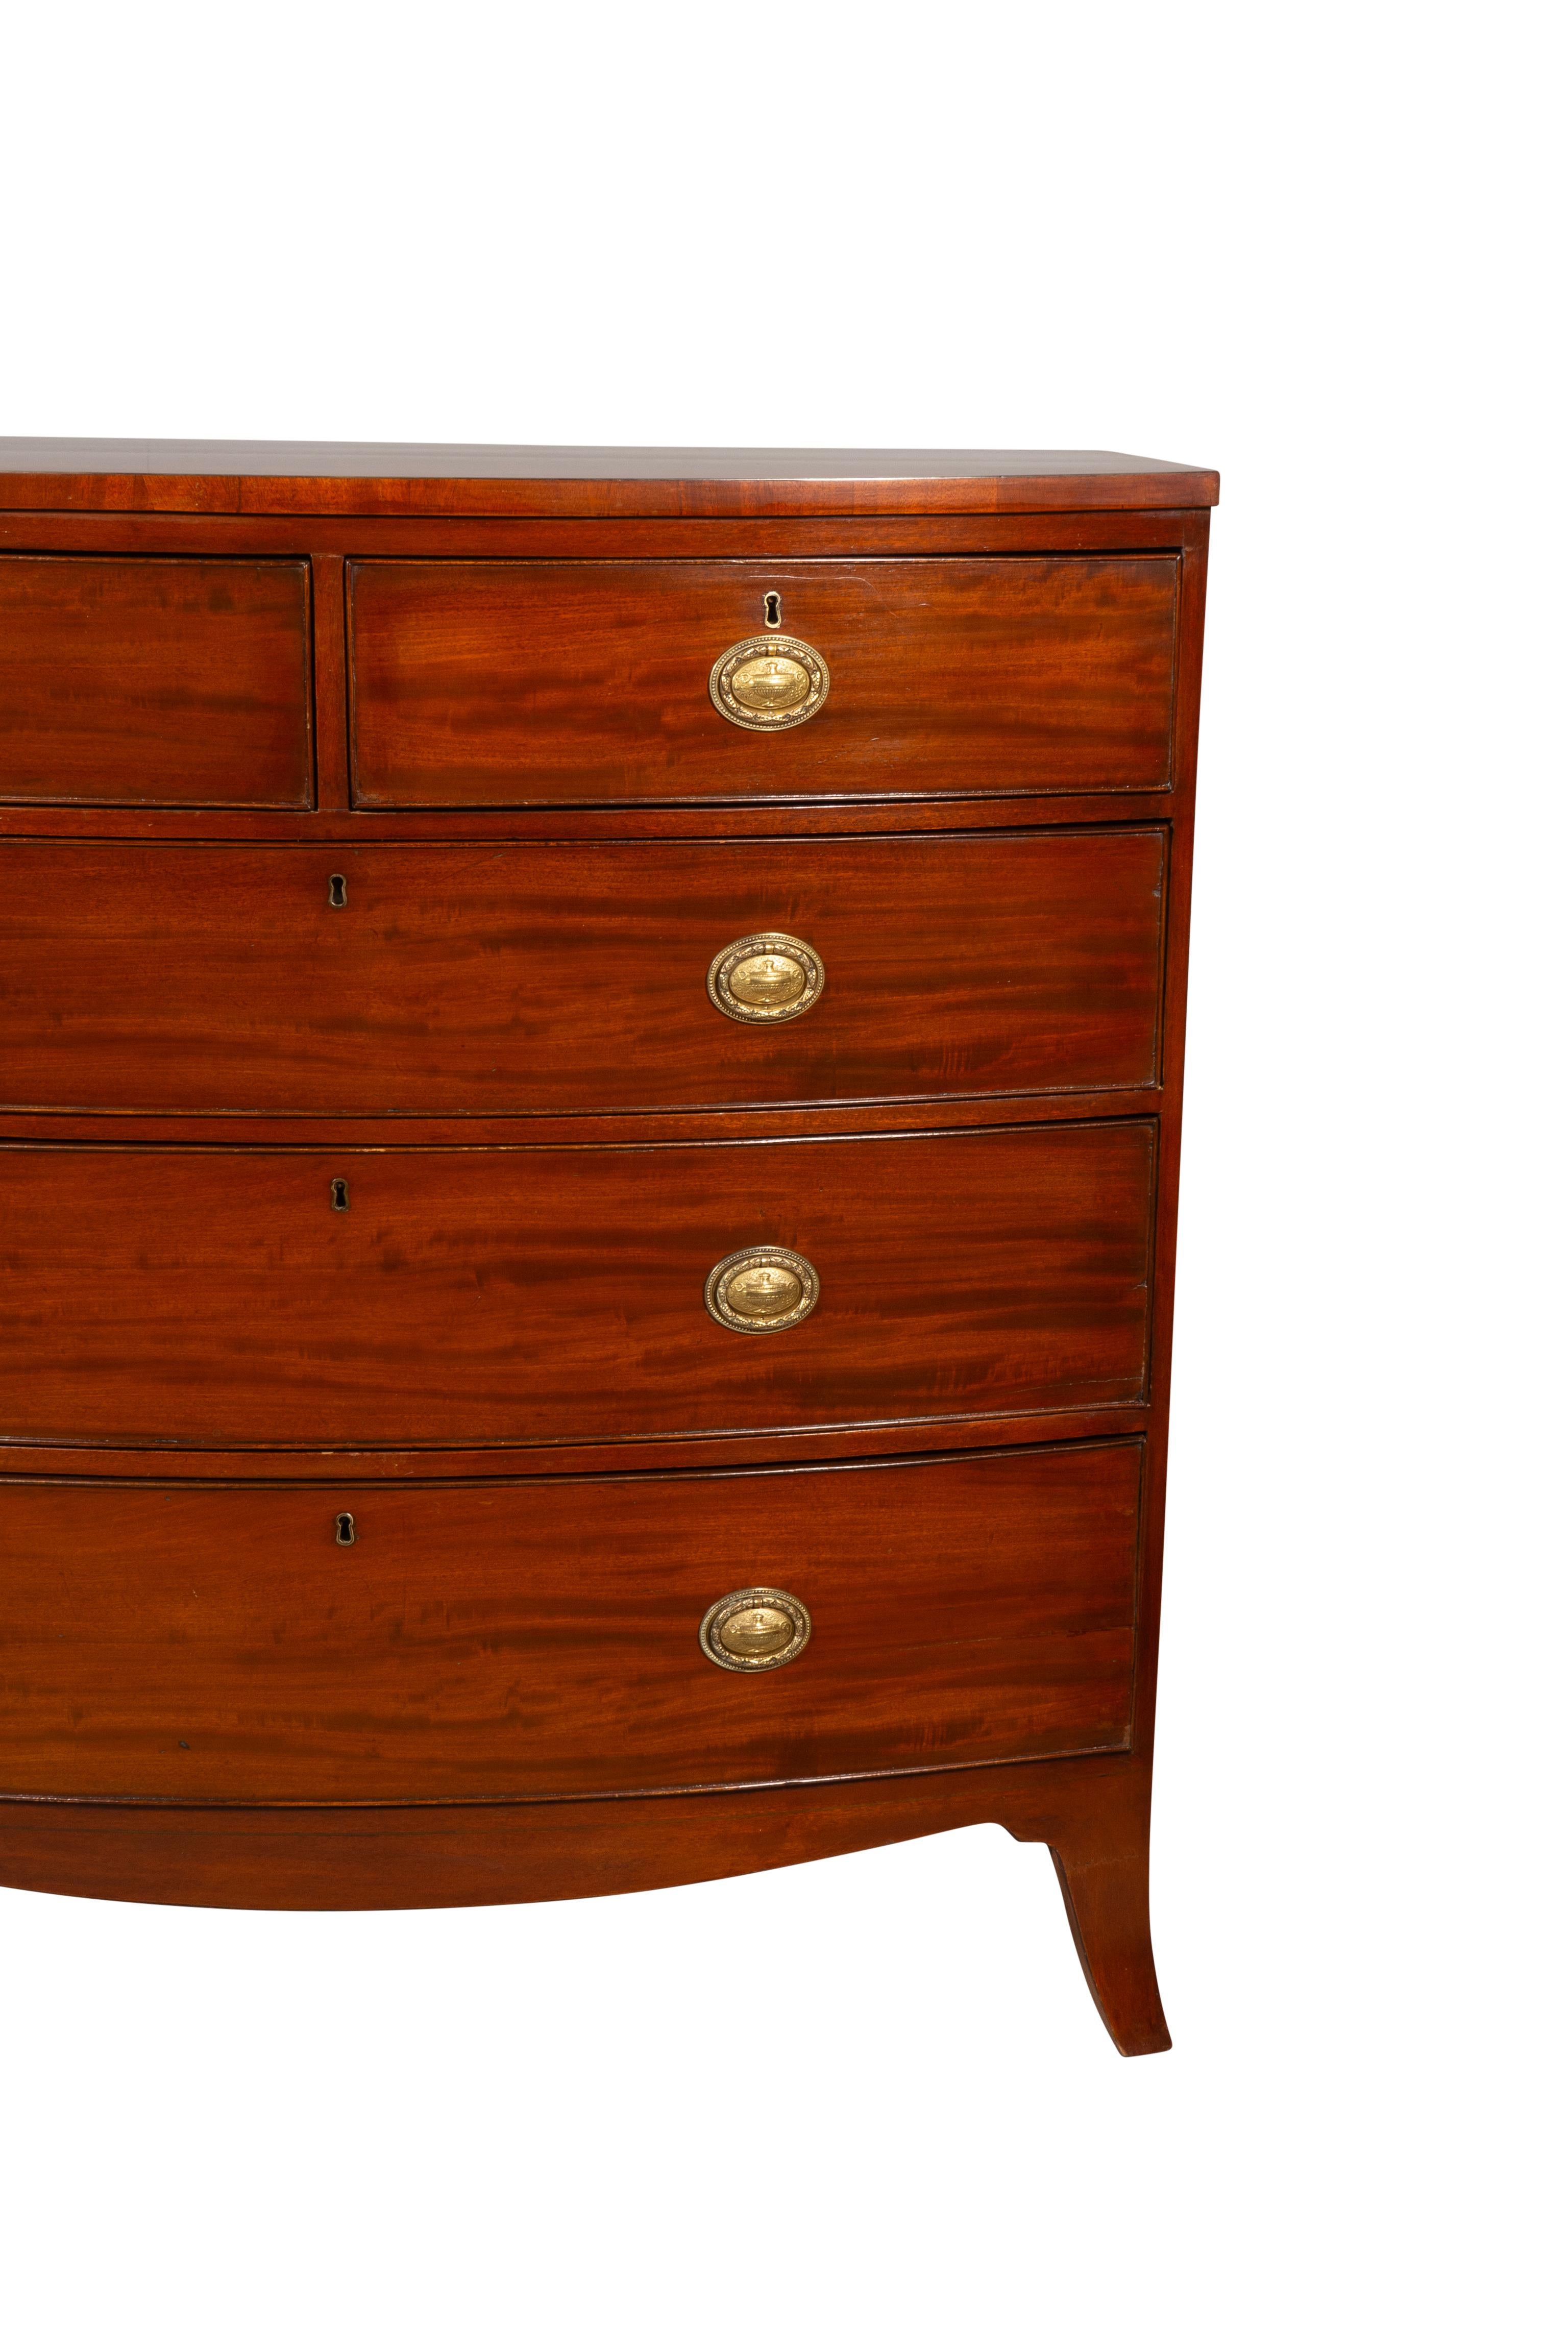 Regency Mahogany Bow front Chest Of Drawers For Sale 4